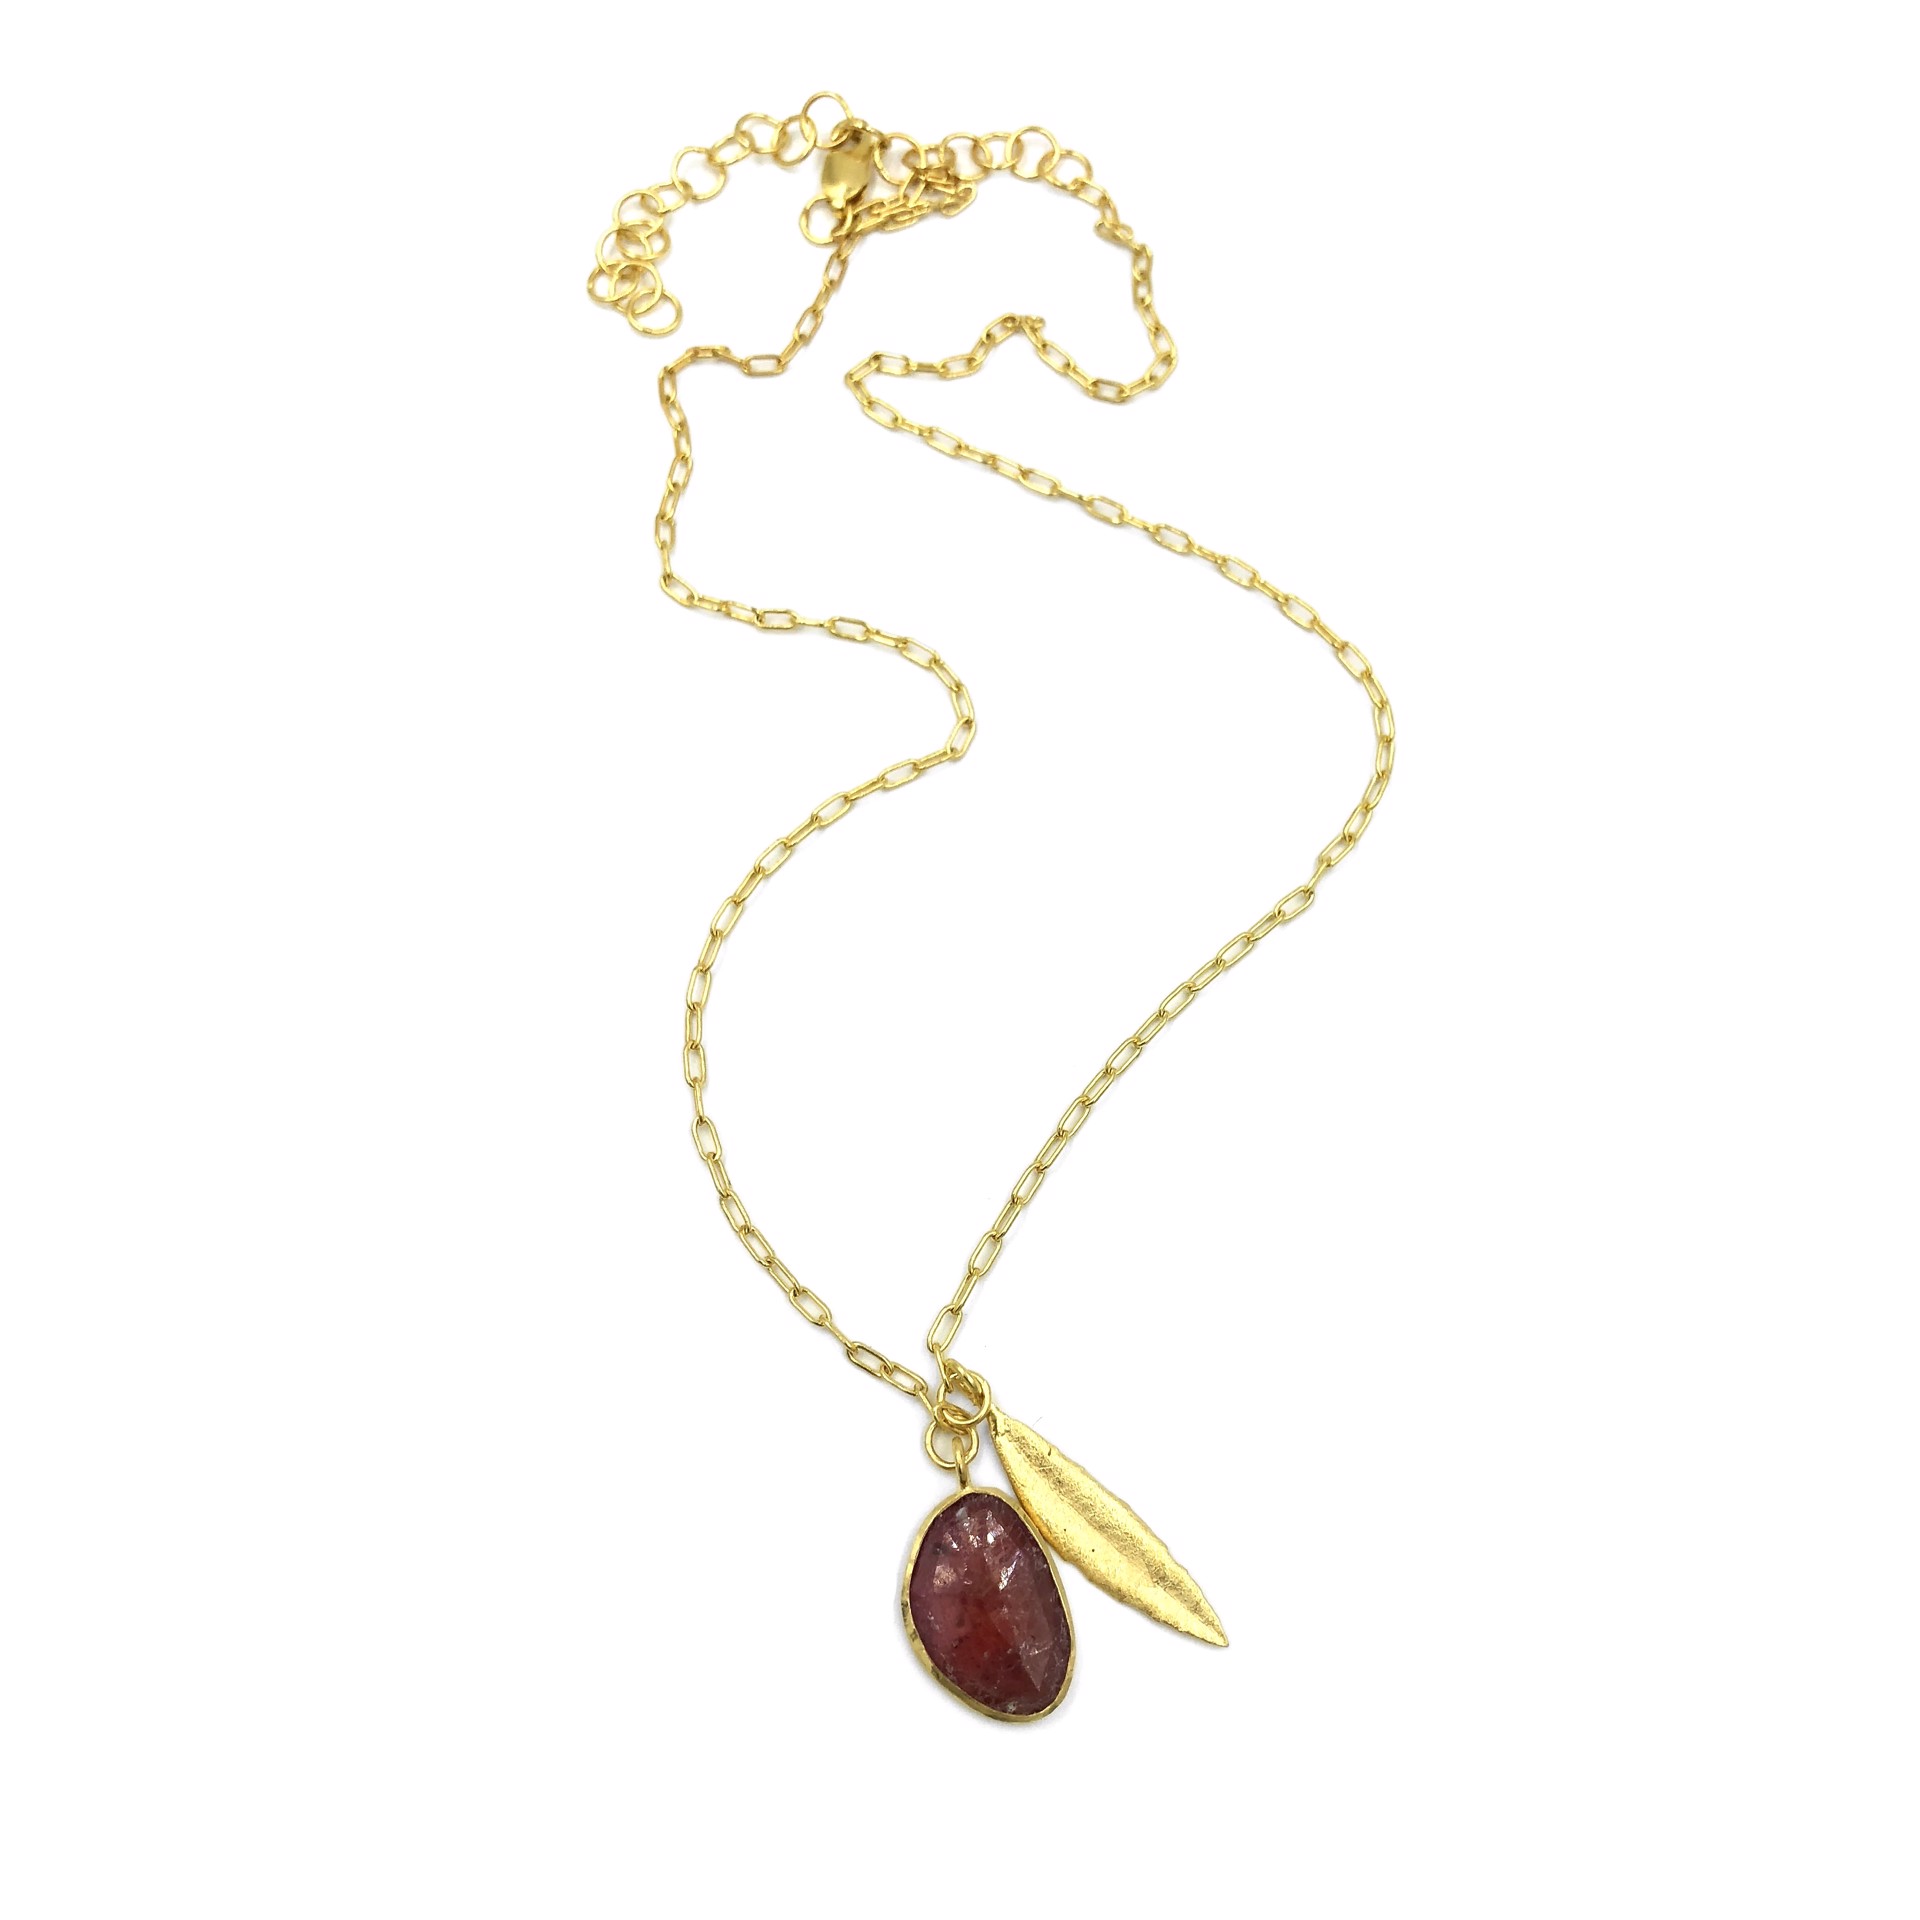 Gold Saphhire Charm Necklace by Anna Johnson